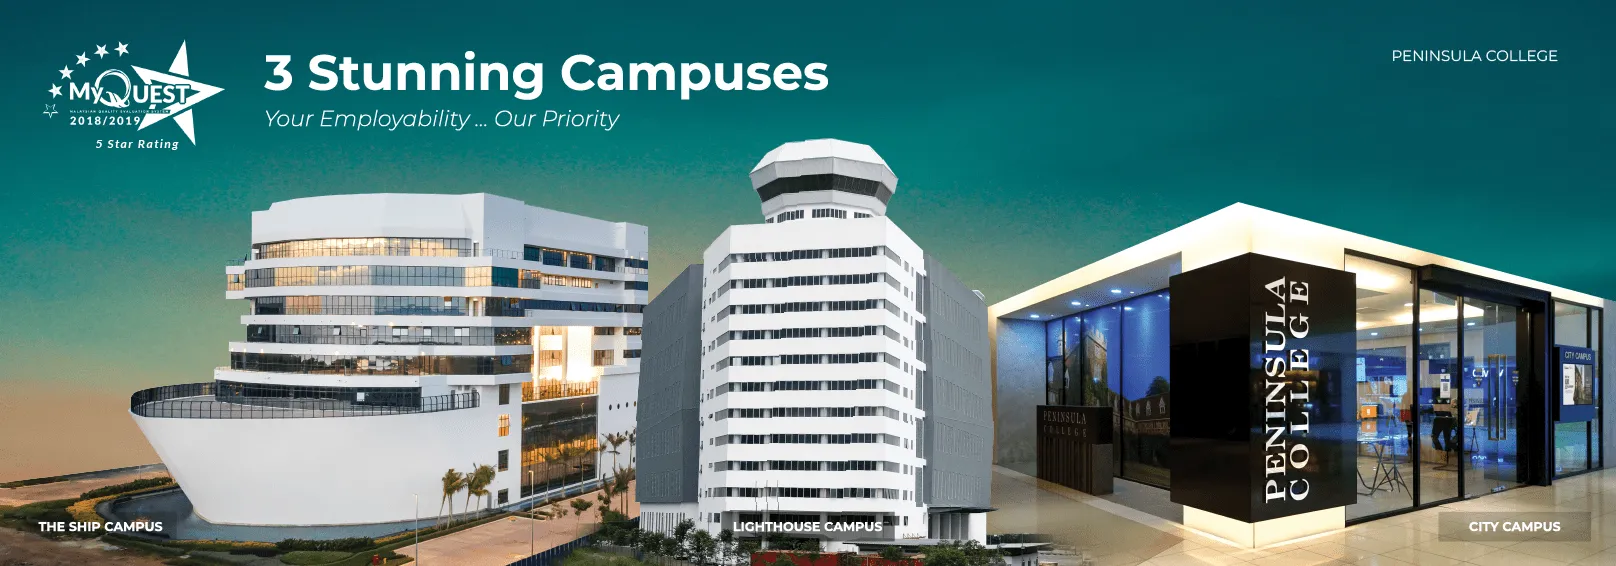 3-Campuses-Compressed-min